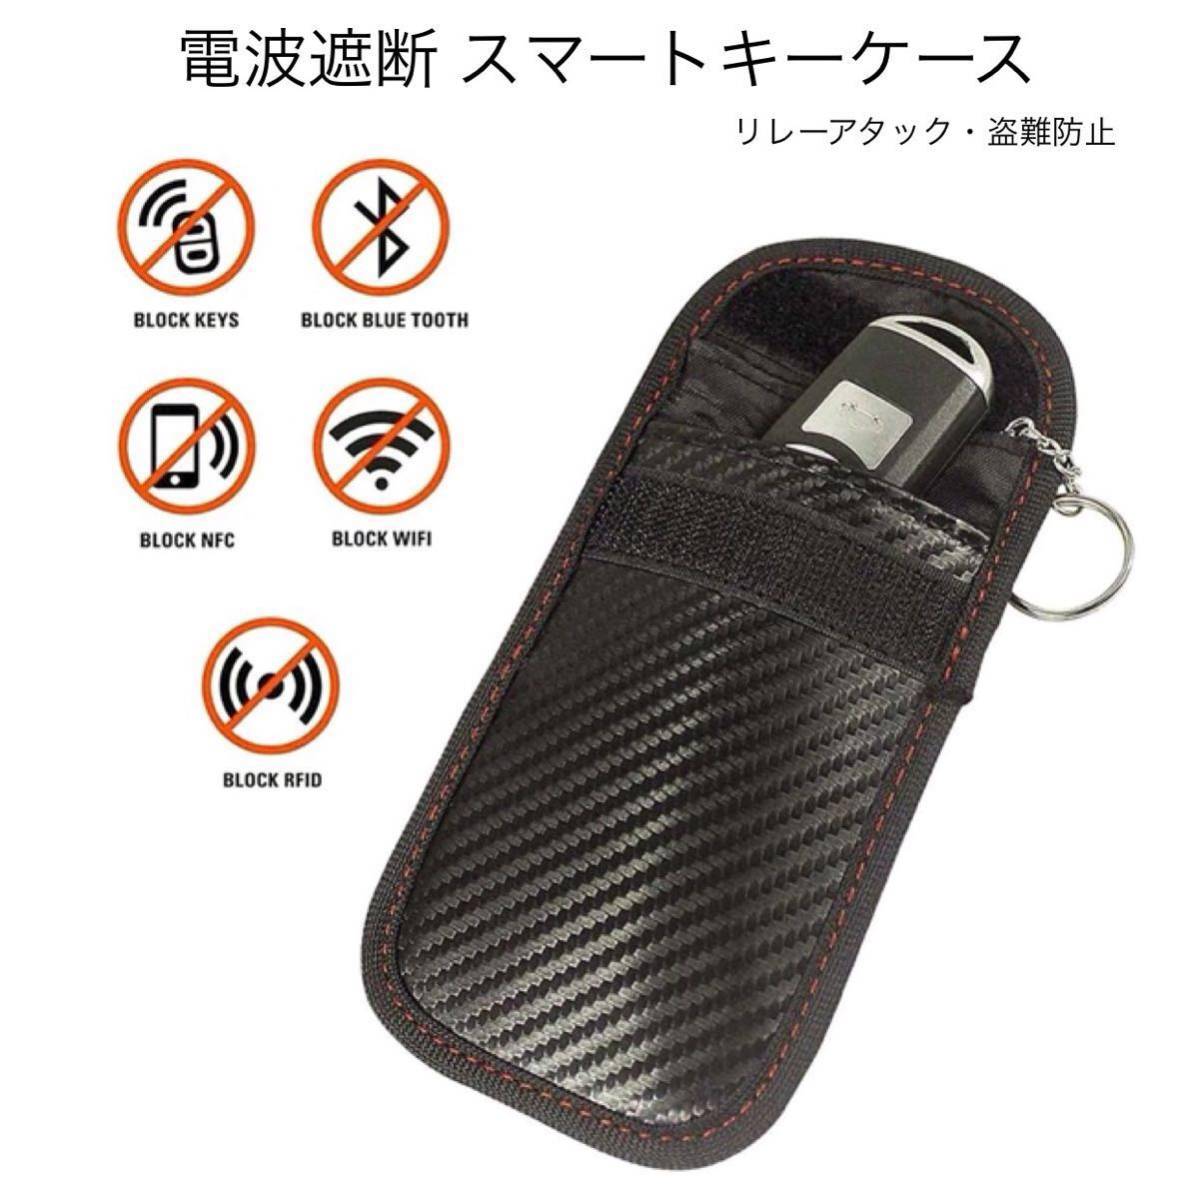  radio wave blocking smart key case car relay attack anti-theft for equipment waterproof keep convenience 